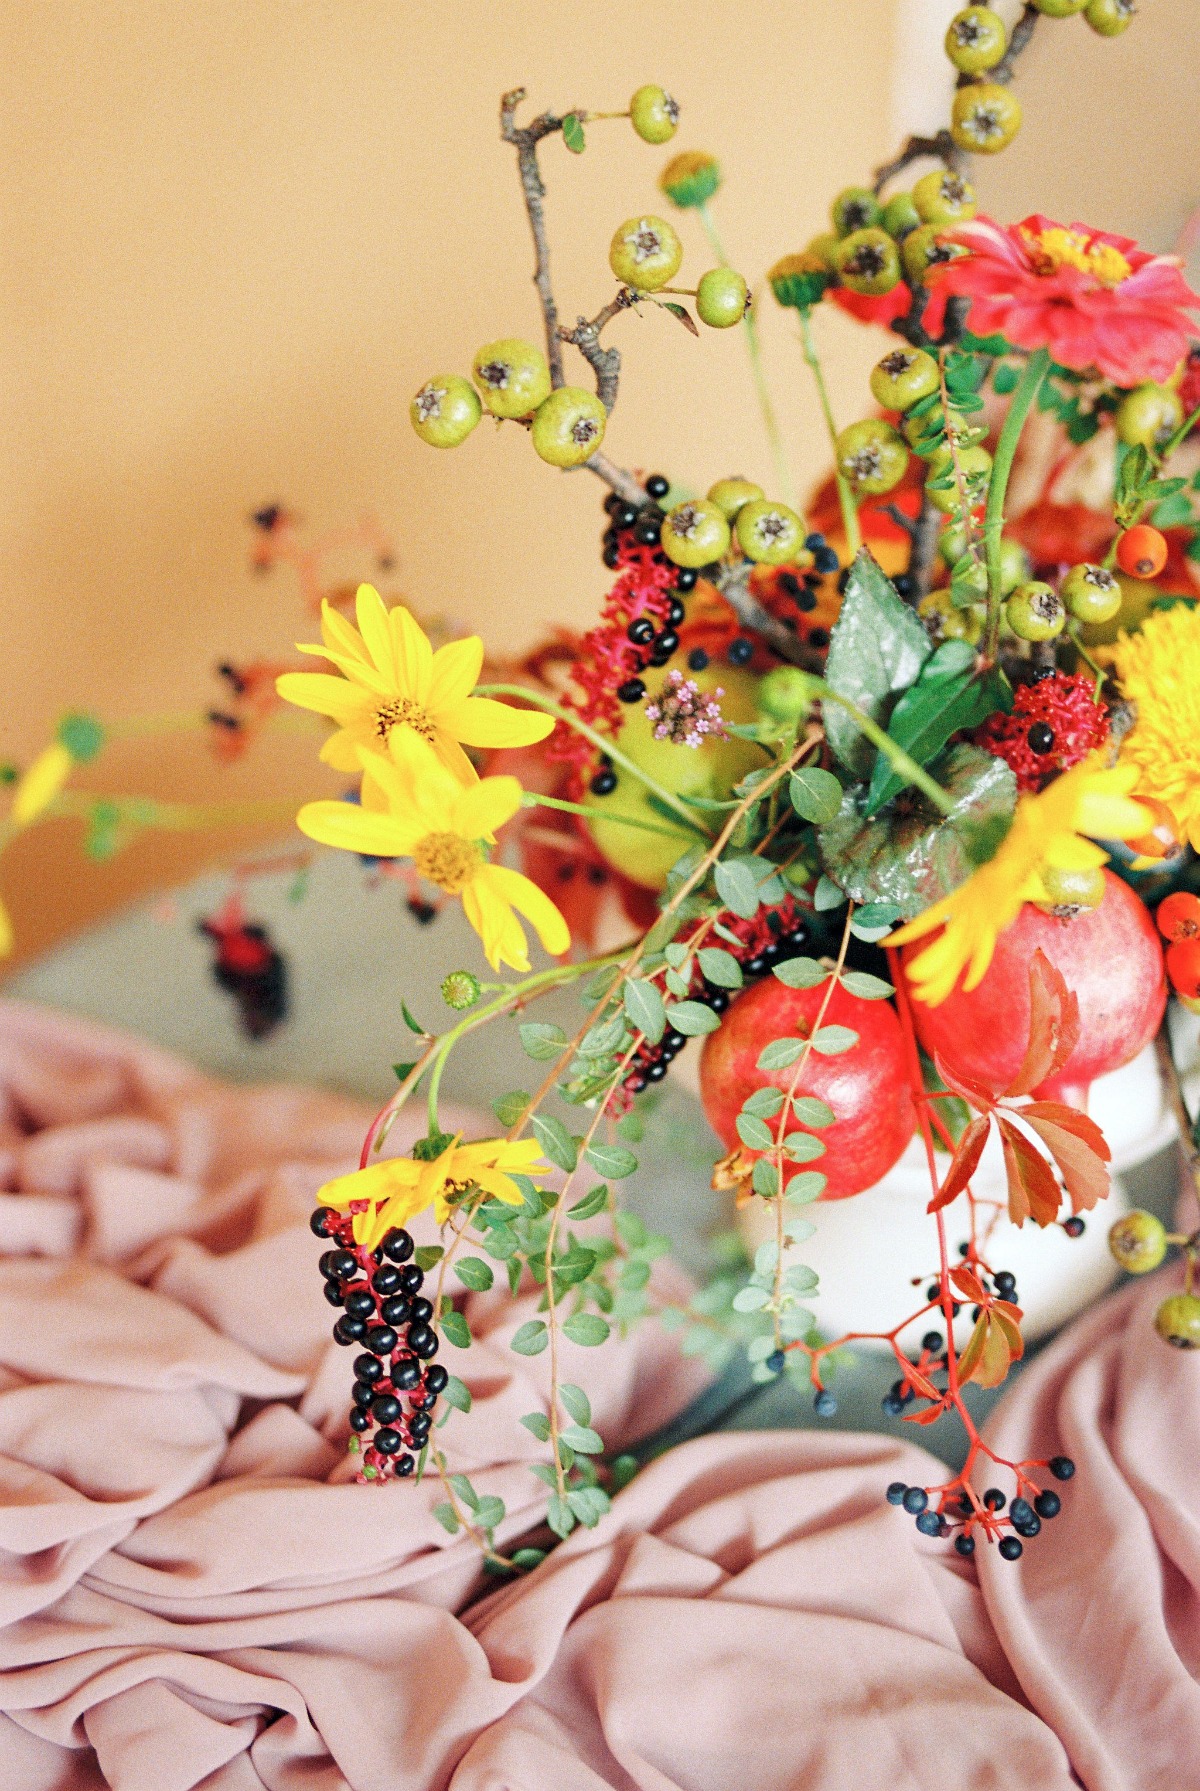 The Bloom Menagerie: Nine Centerpieces that Set the Scene for a Festive Season